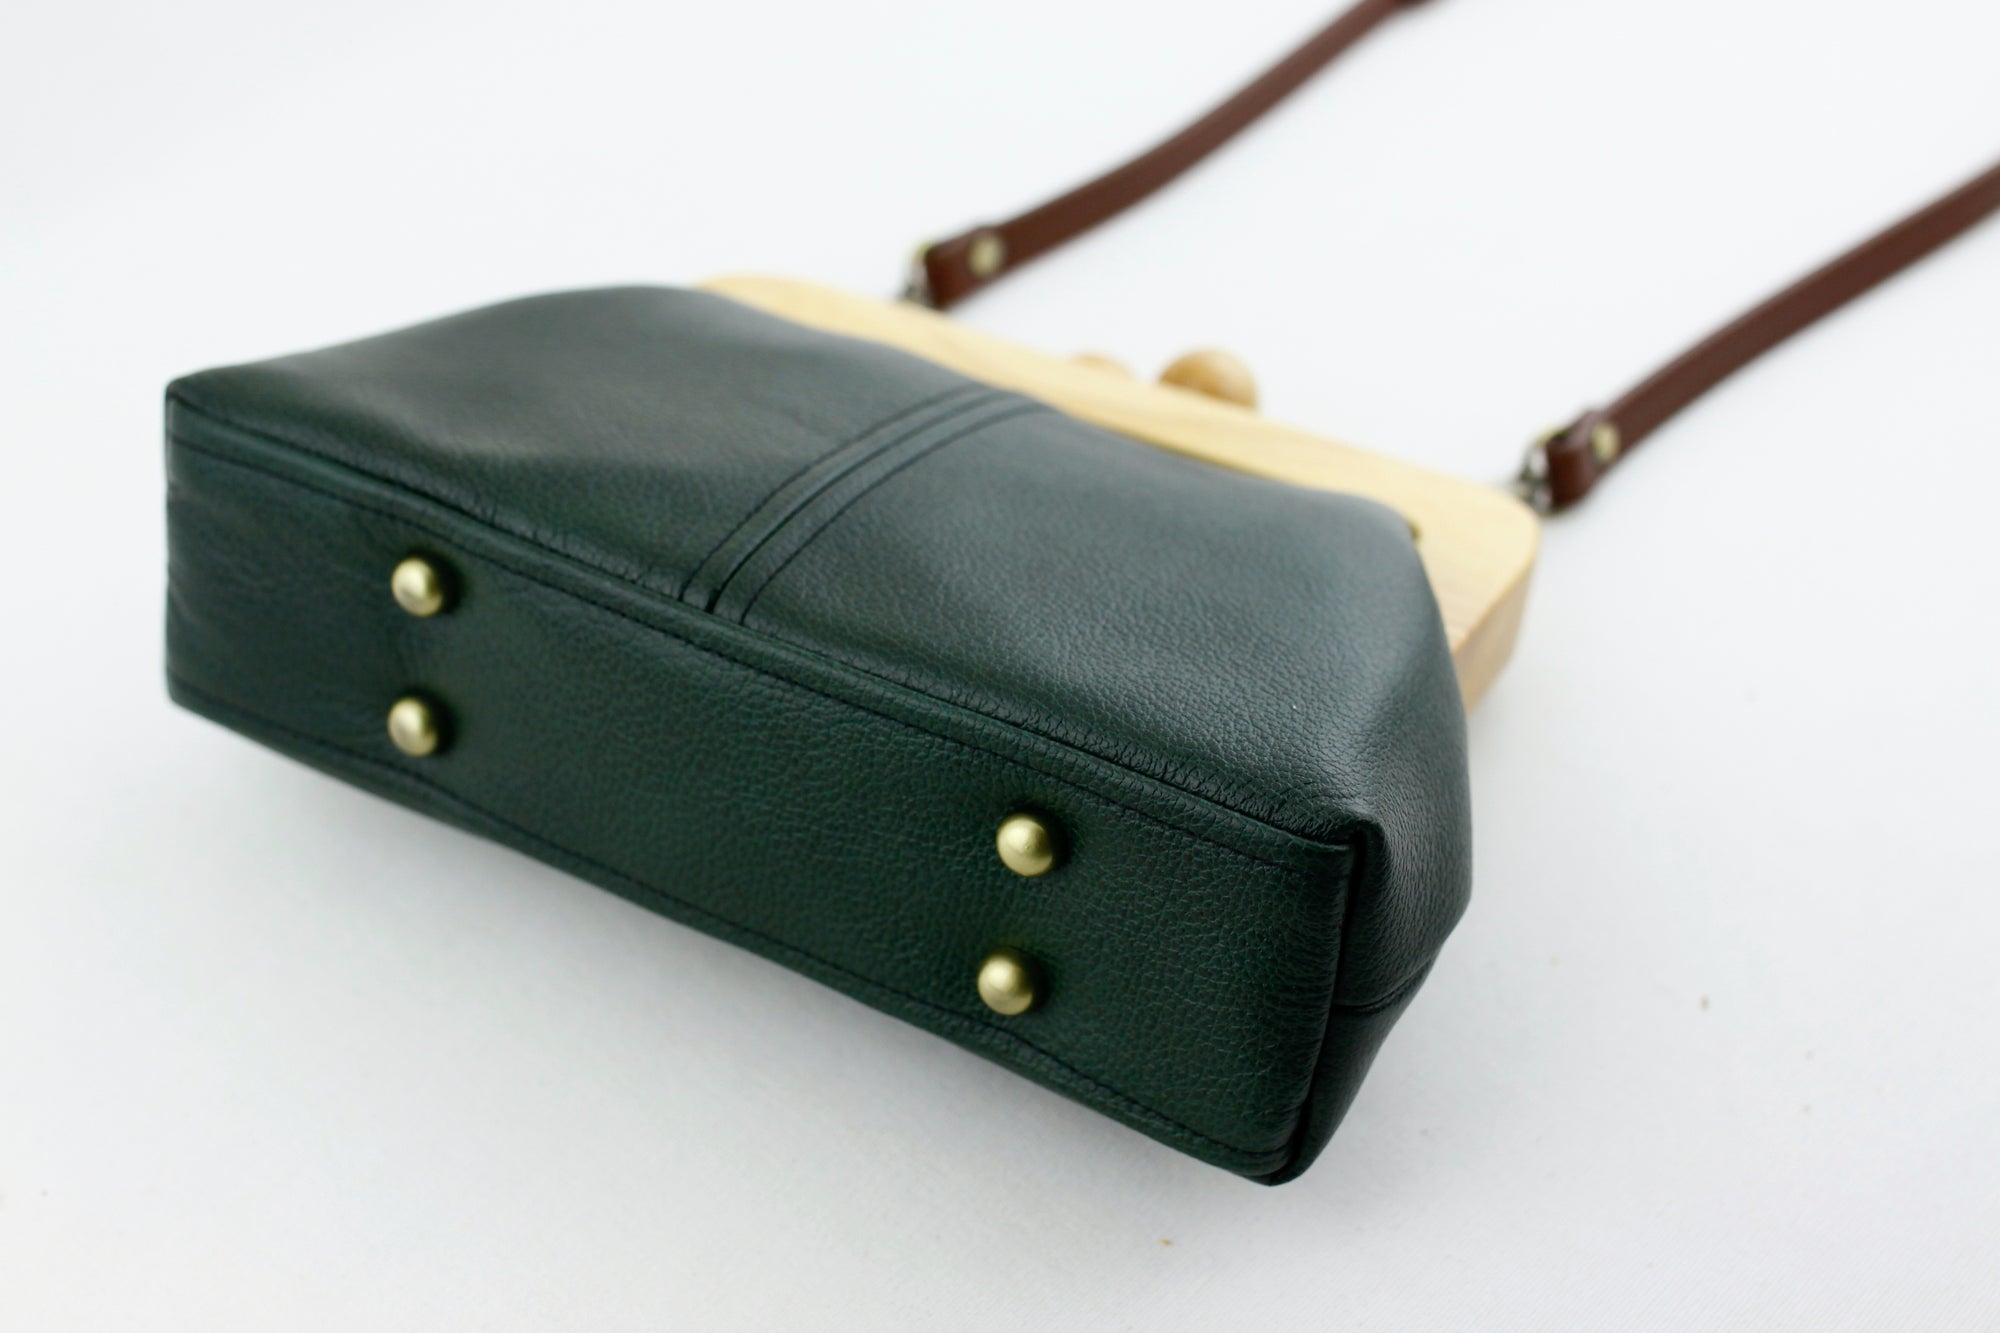 Emerald Green Genuine Leather Clutch Bag with Strap | PINKOASIS